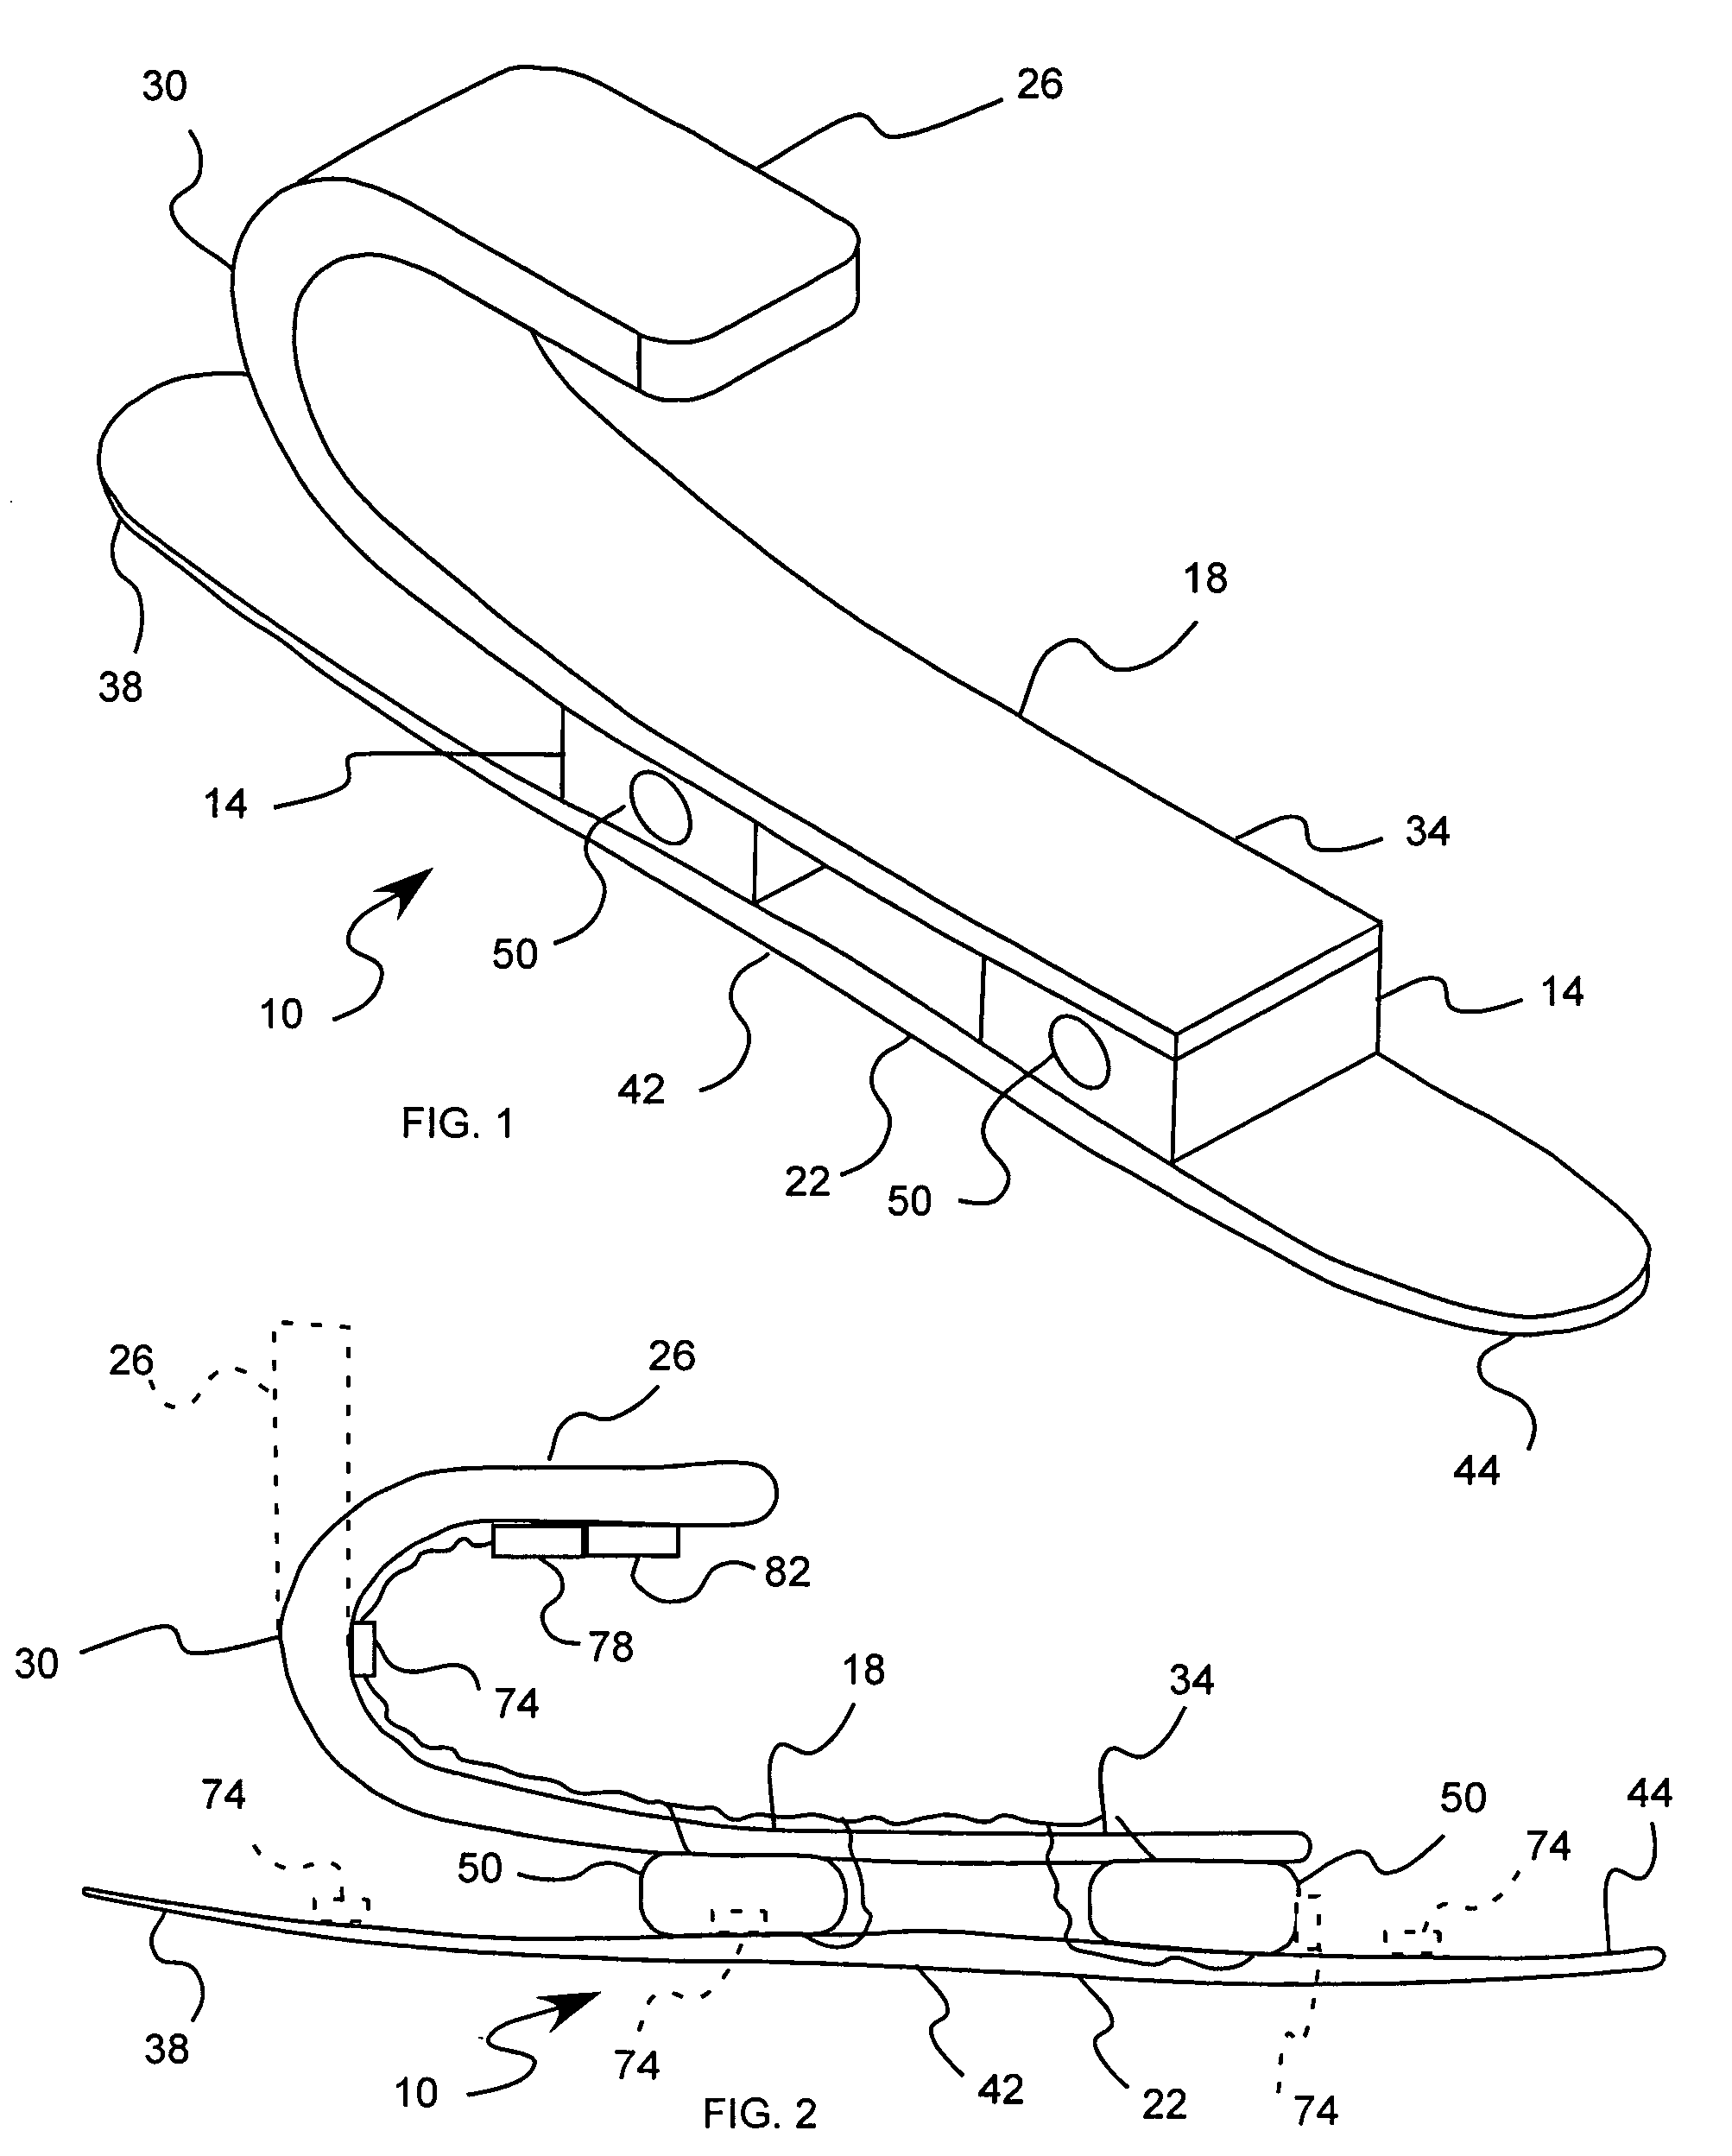 Prosthetic foot with energy transfer including variable orifice